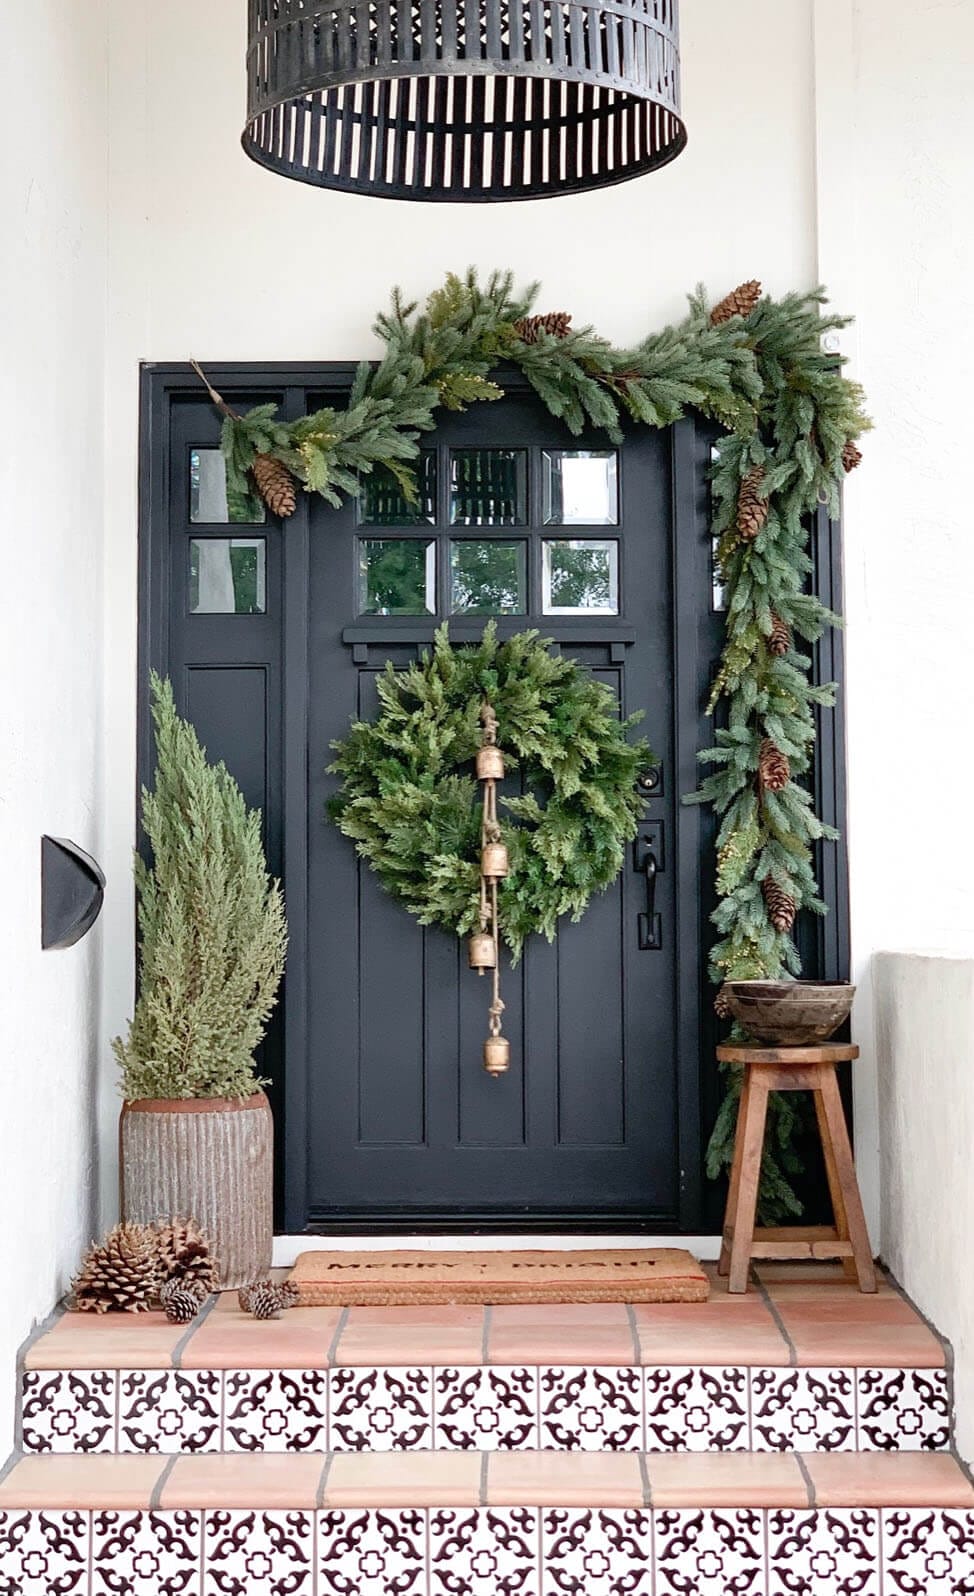 Looking for gorgeous Christmas porch decor ideas? I have over 100 Christmas porch decor ideas perfect for ny style. Add as much as you love.